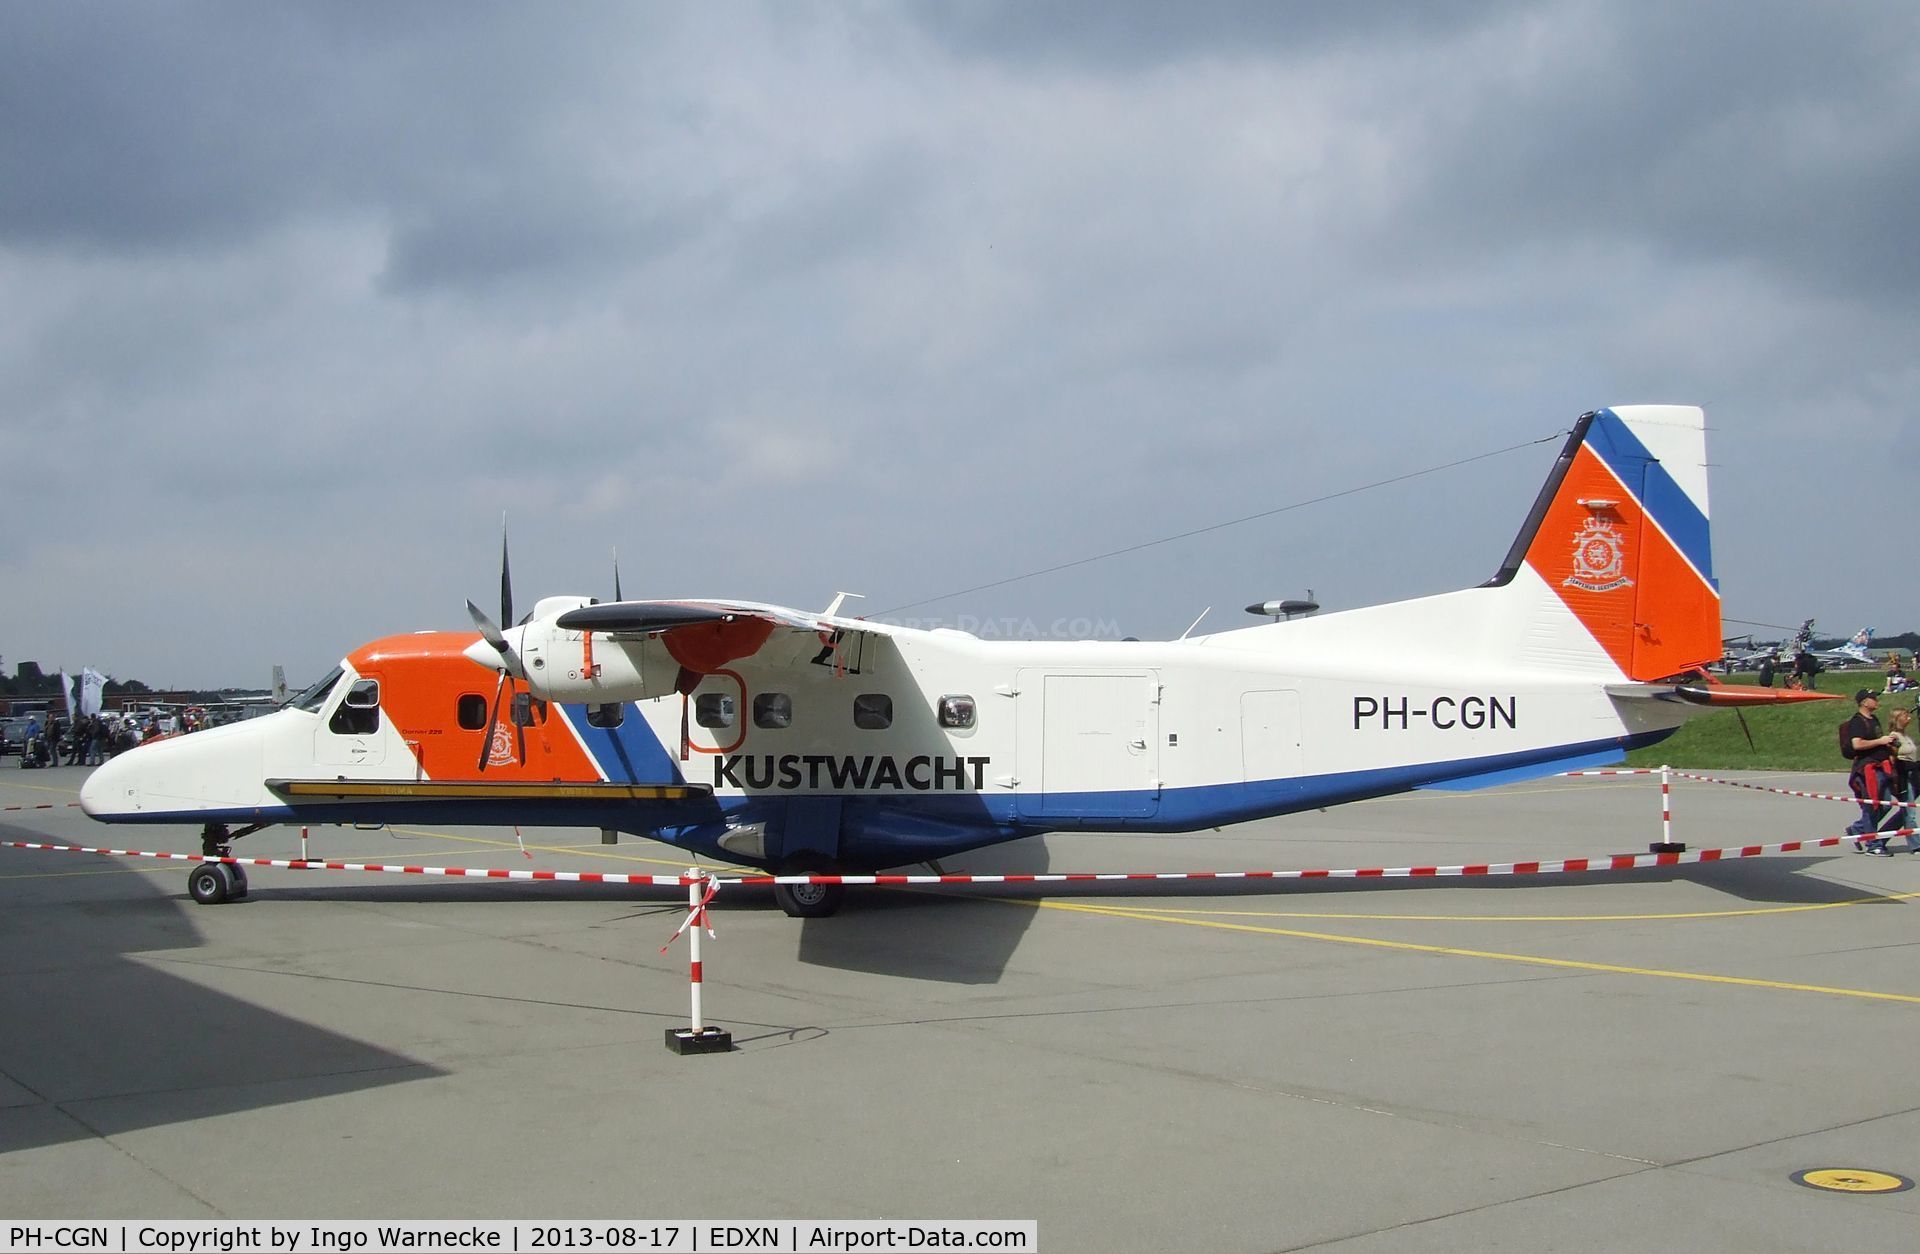 PH-CGN, 1990 Dornier 228-212 C/N 8181, Dornier Do 228-212 of the Dutch Coast Guard (Kustwacht) at the Spottersday of the Nordholz Airday 2013 celebrationg 100 Years of German Naval Aviation at Nordholz Naval Aviation Base